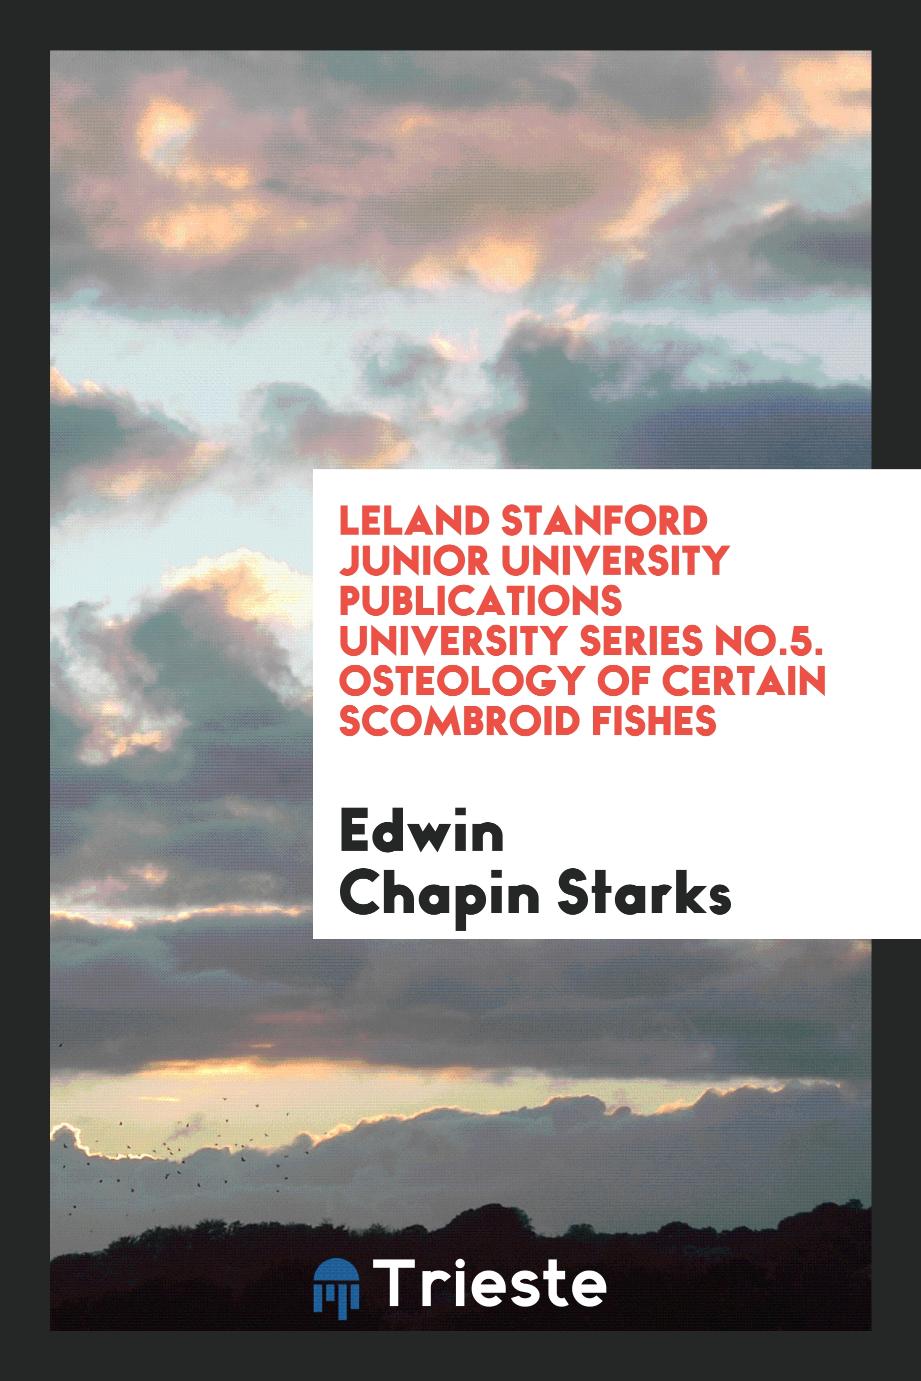 Leland Stanford Junior University Publications University series No.5. Osteology of Certain Scombroid Fishes